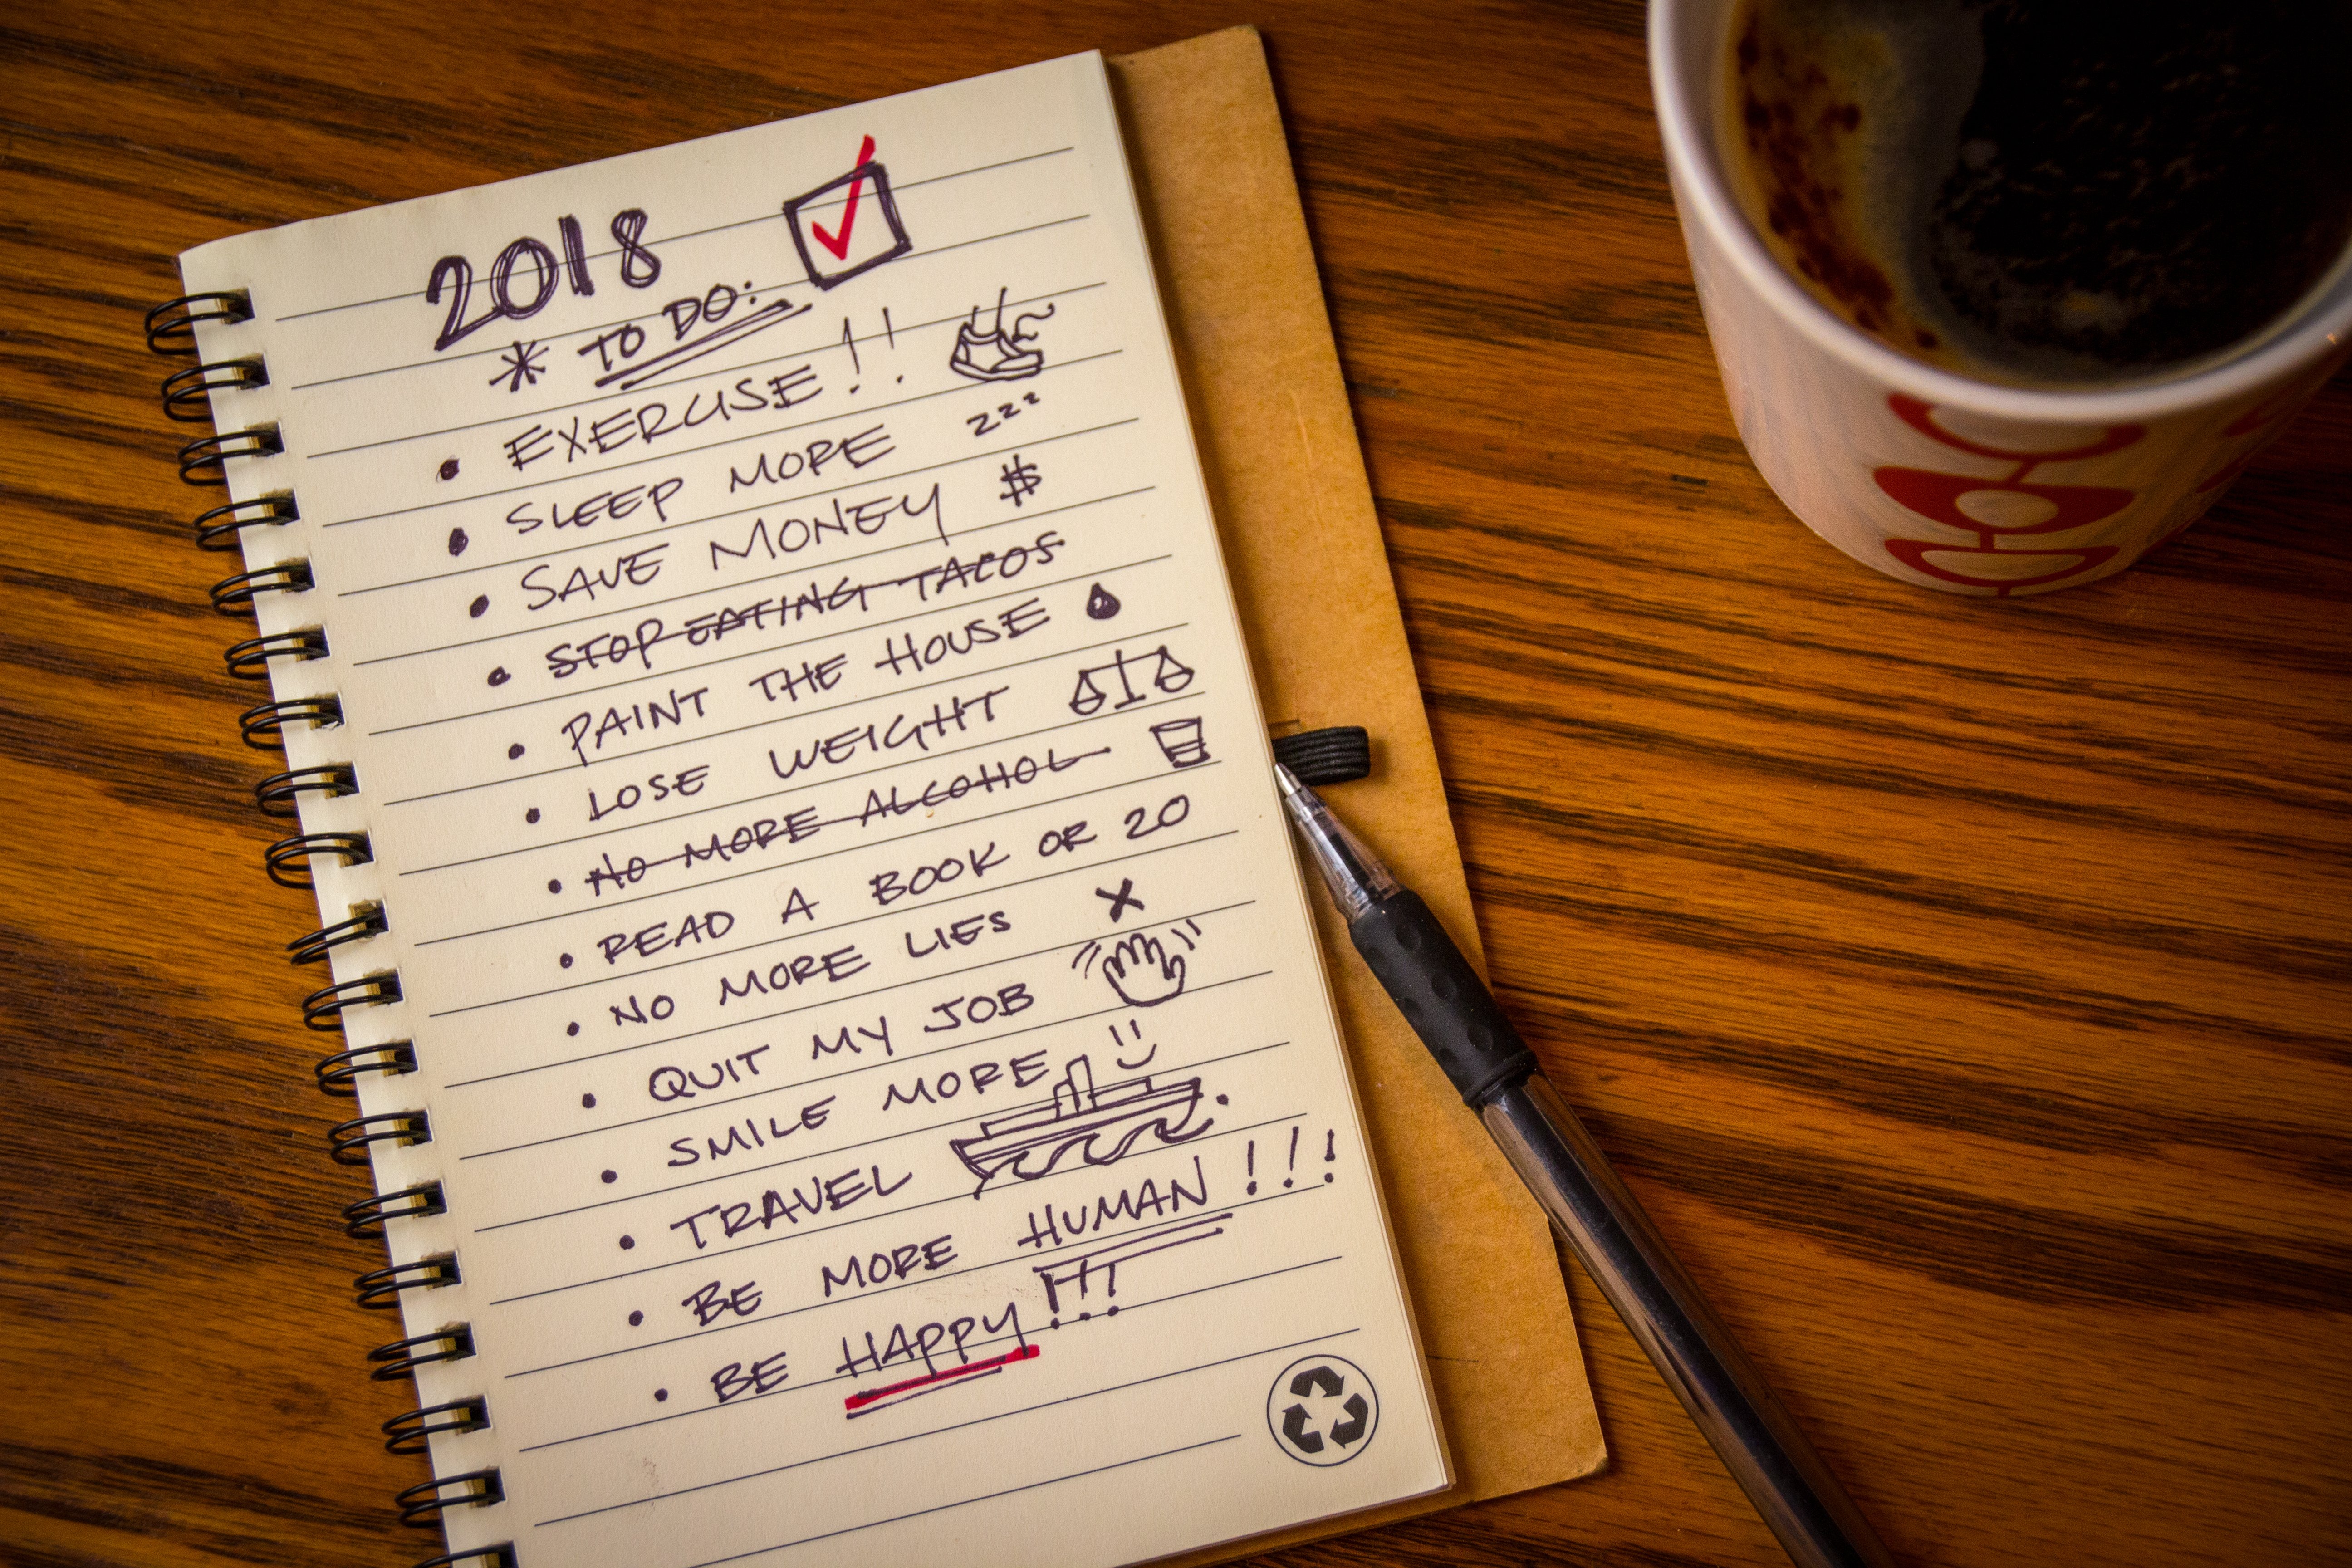 How to keep sticking to your new year's resolutions